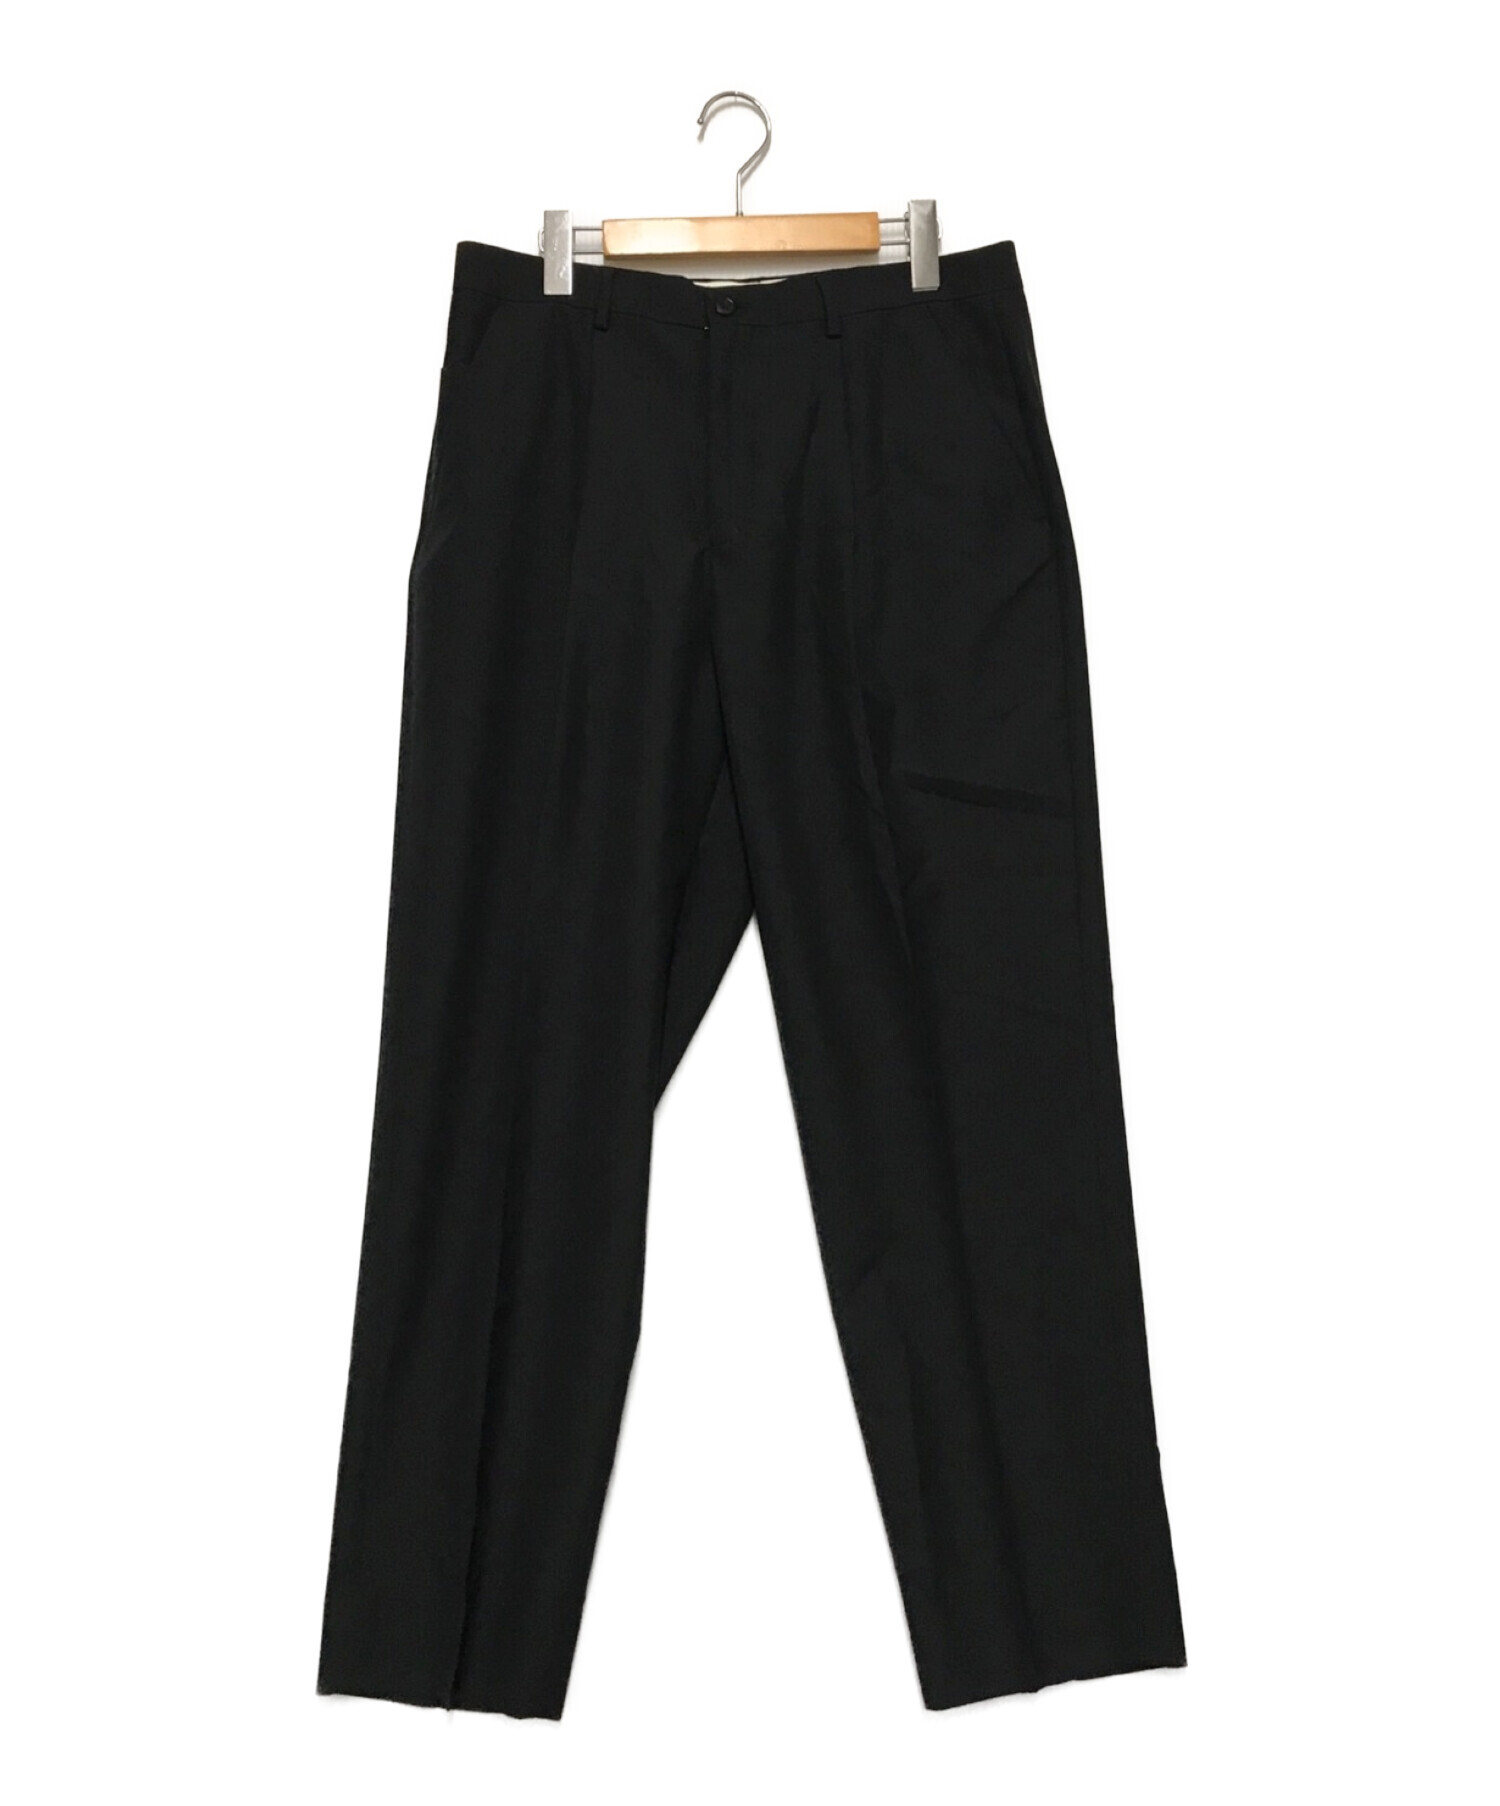 supreme pleated trouser 32 ブラックメンズ - その他